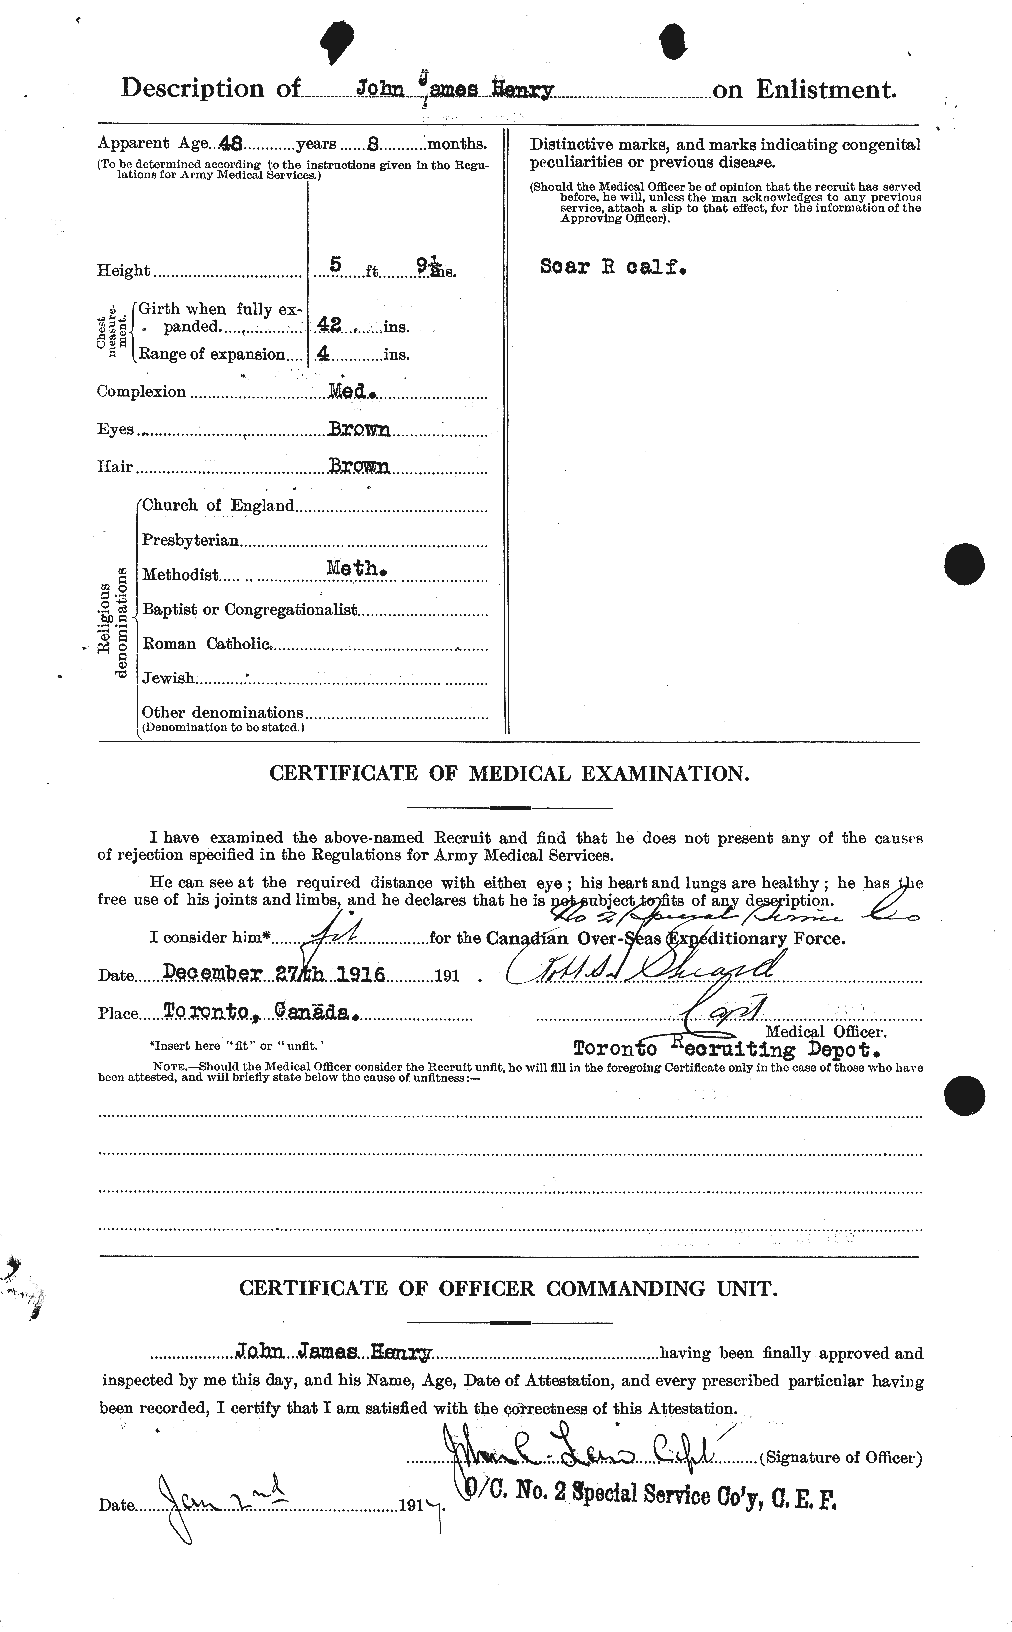 Personnel Records of the First World War - CEF 387623b